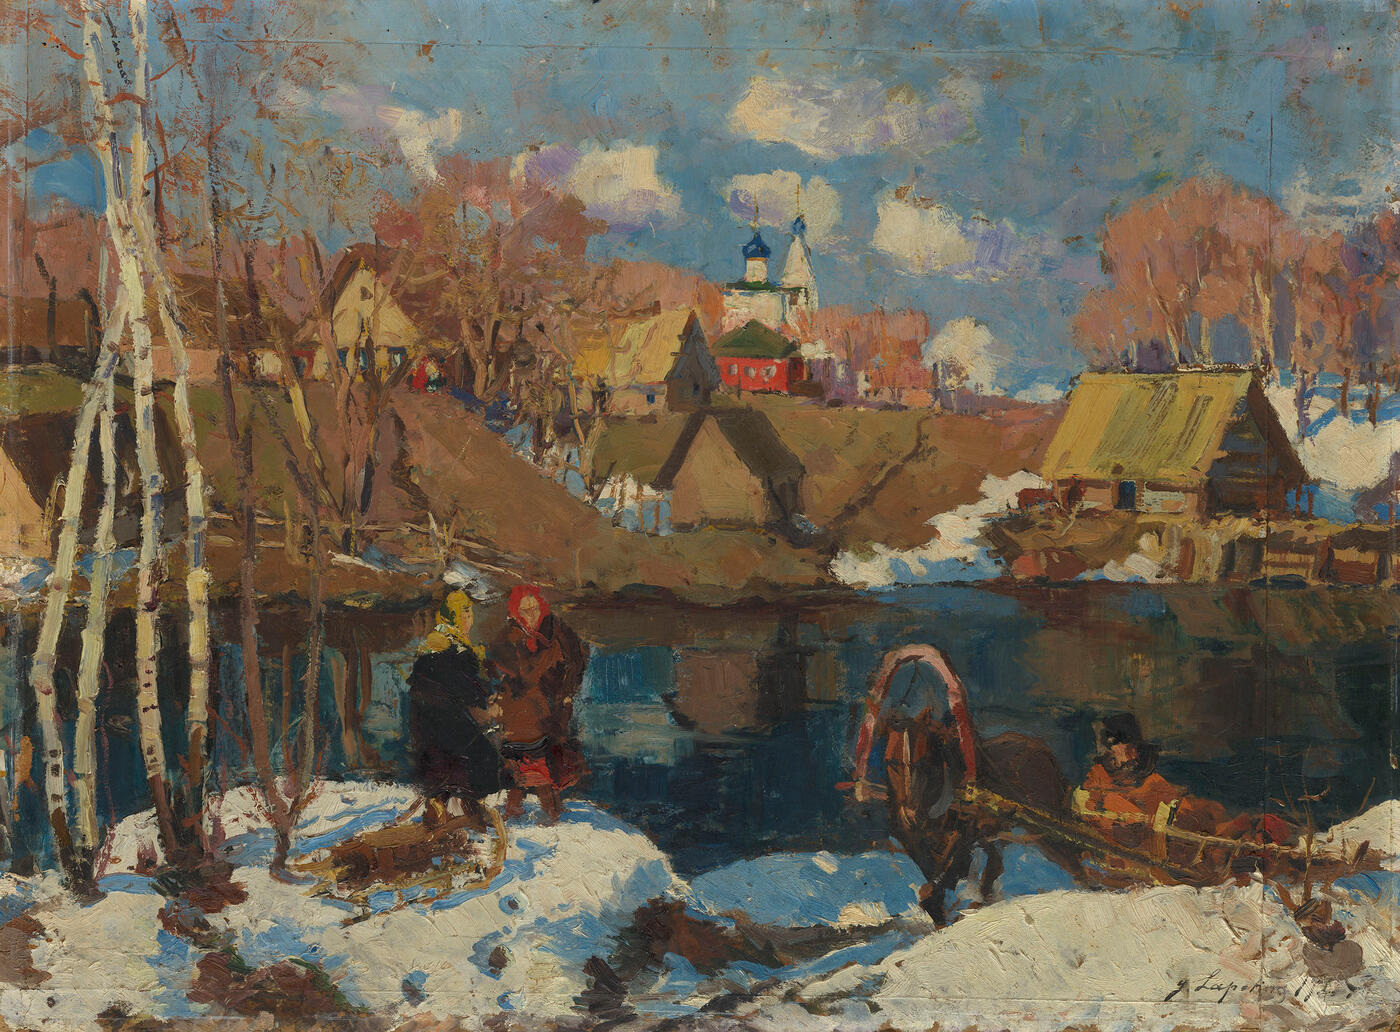 Early Spring in a Village